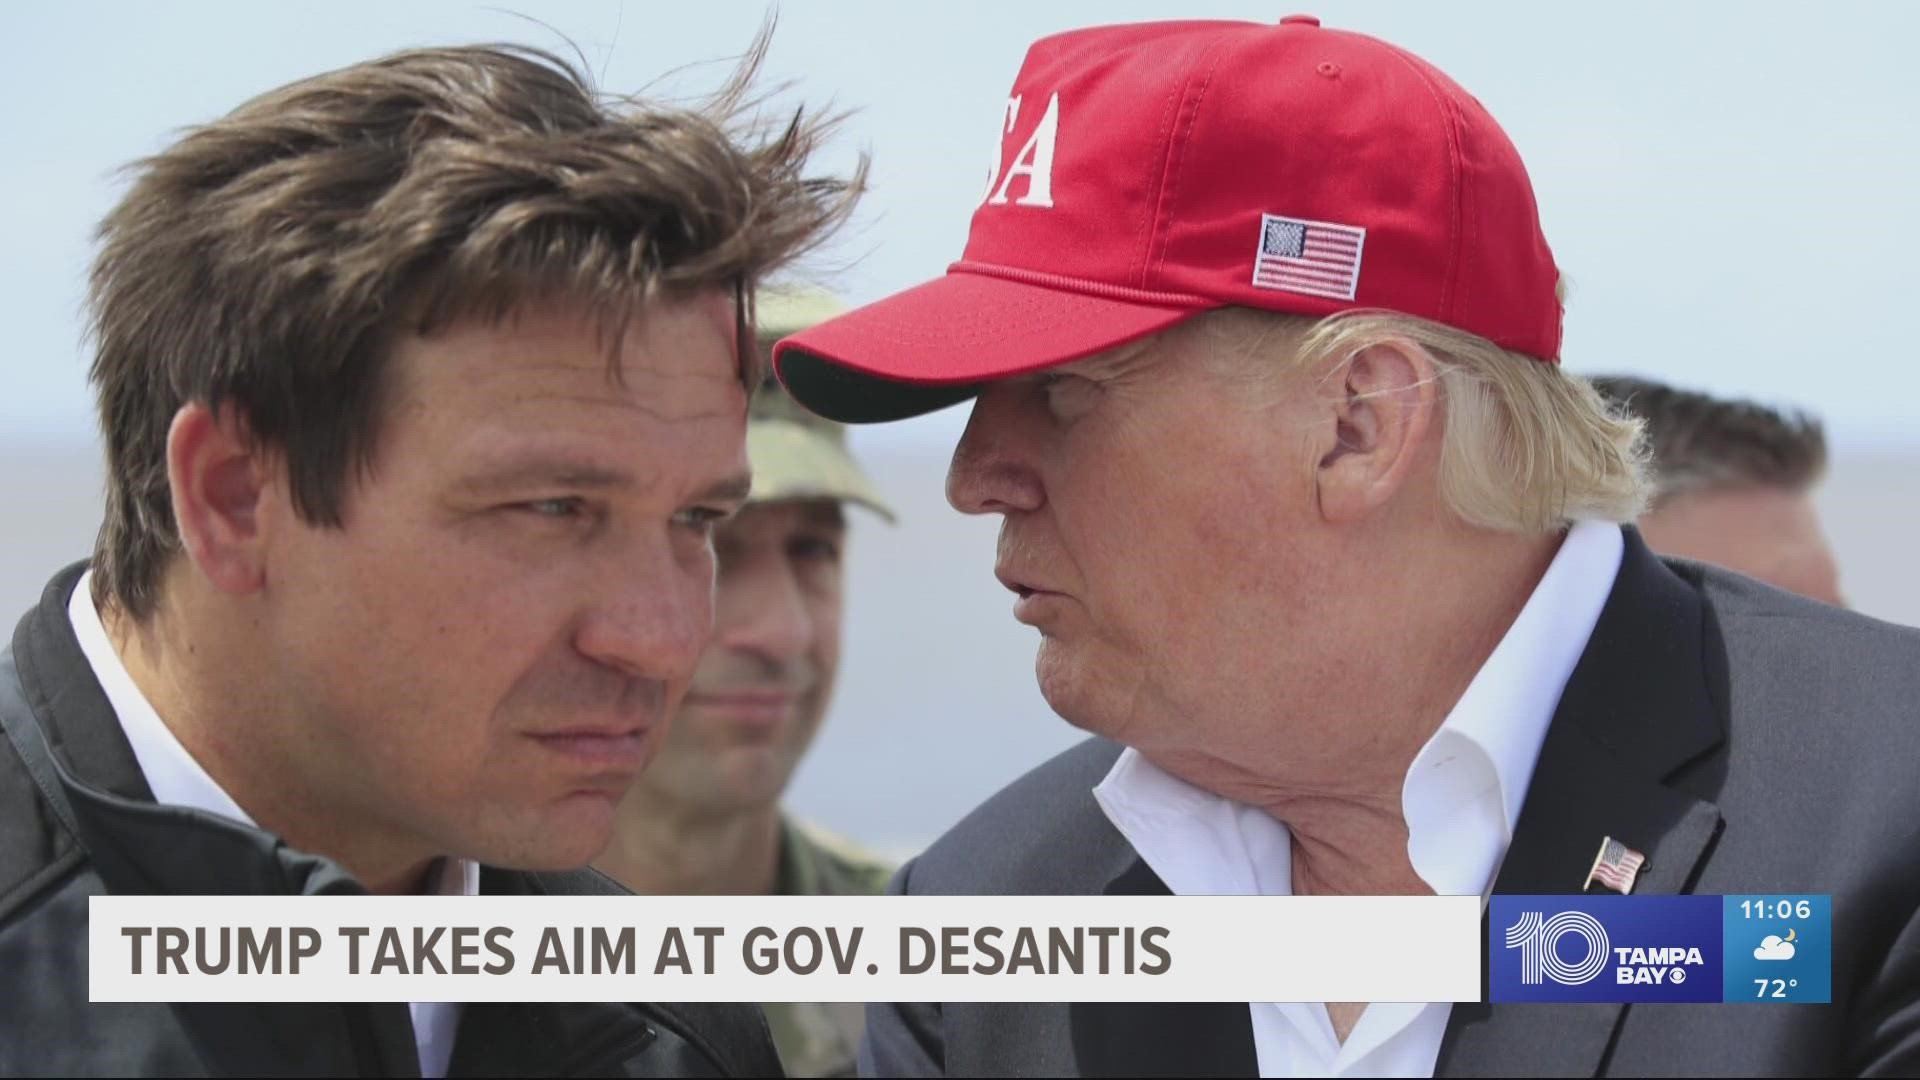 The statement is the first direct attack Trump has launched against DeSantis since the governor has risen in the ranks among a once Trump-dominated Republican party.